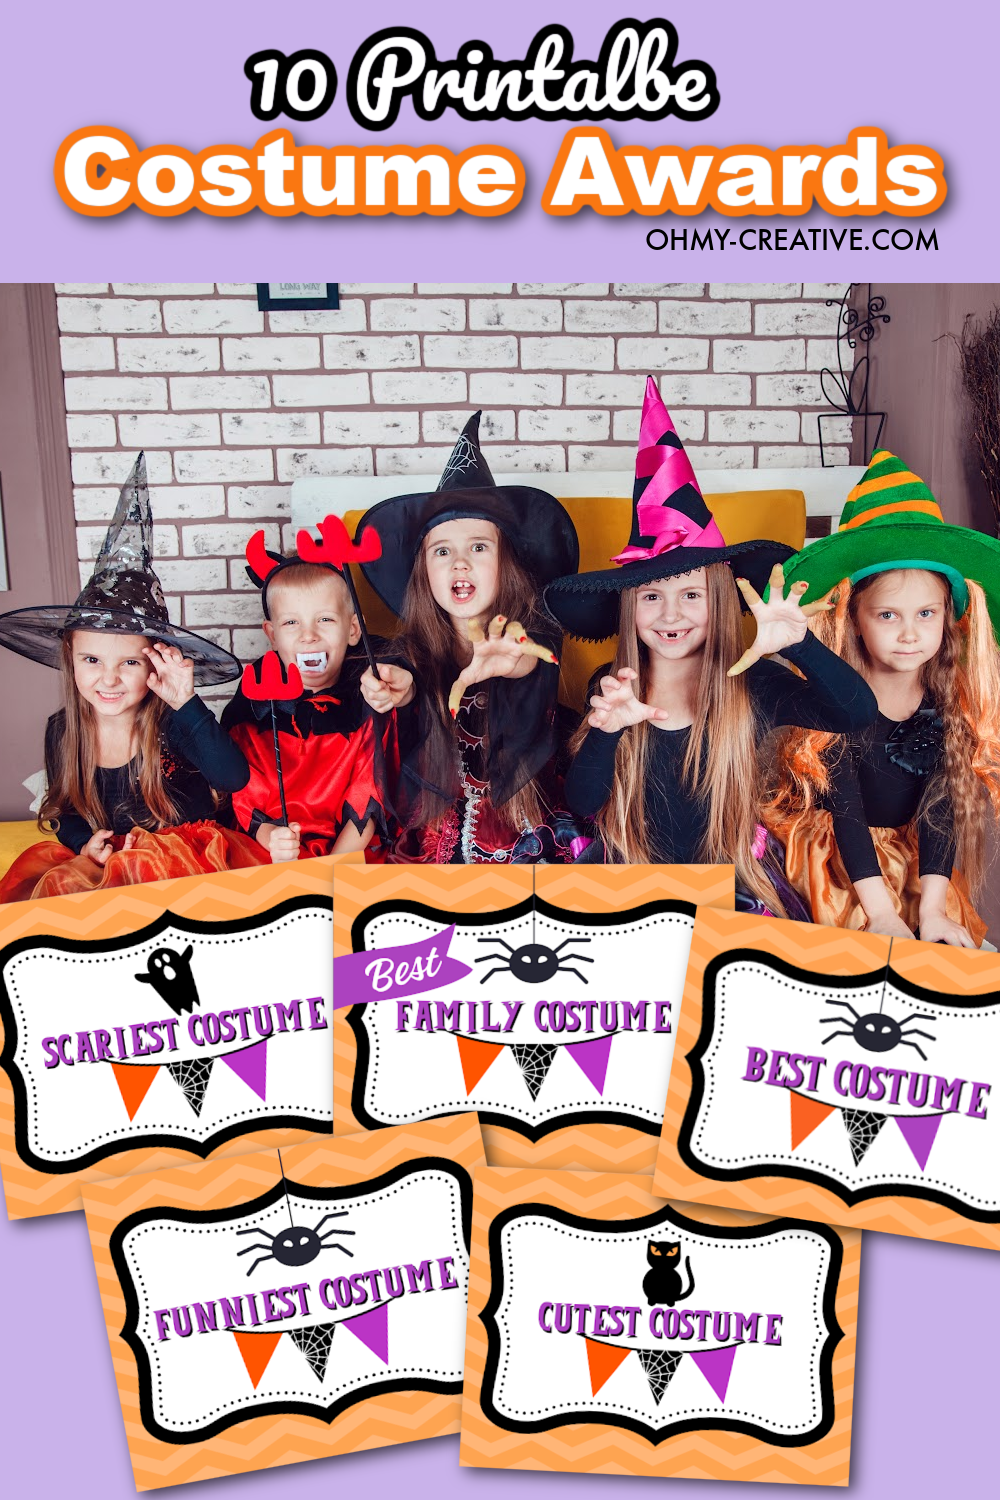 A group of kids dressed in Halloween costumes with Printable Halloween costume awards.